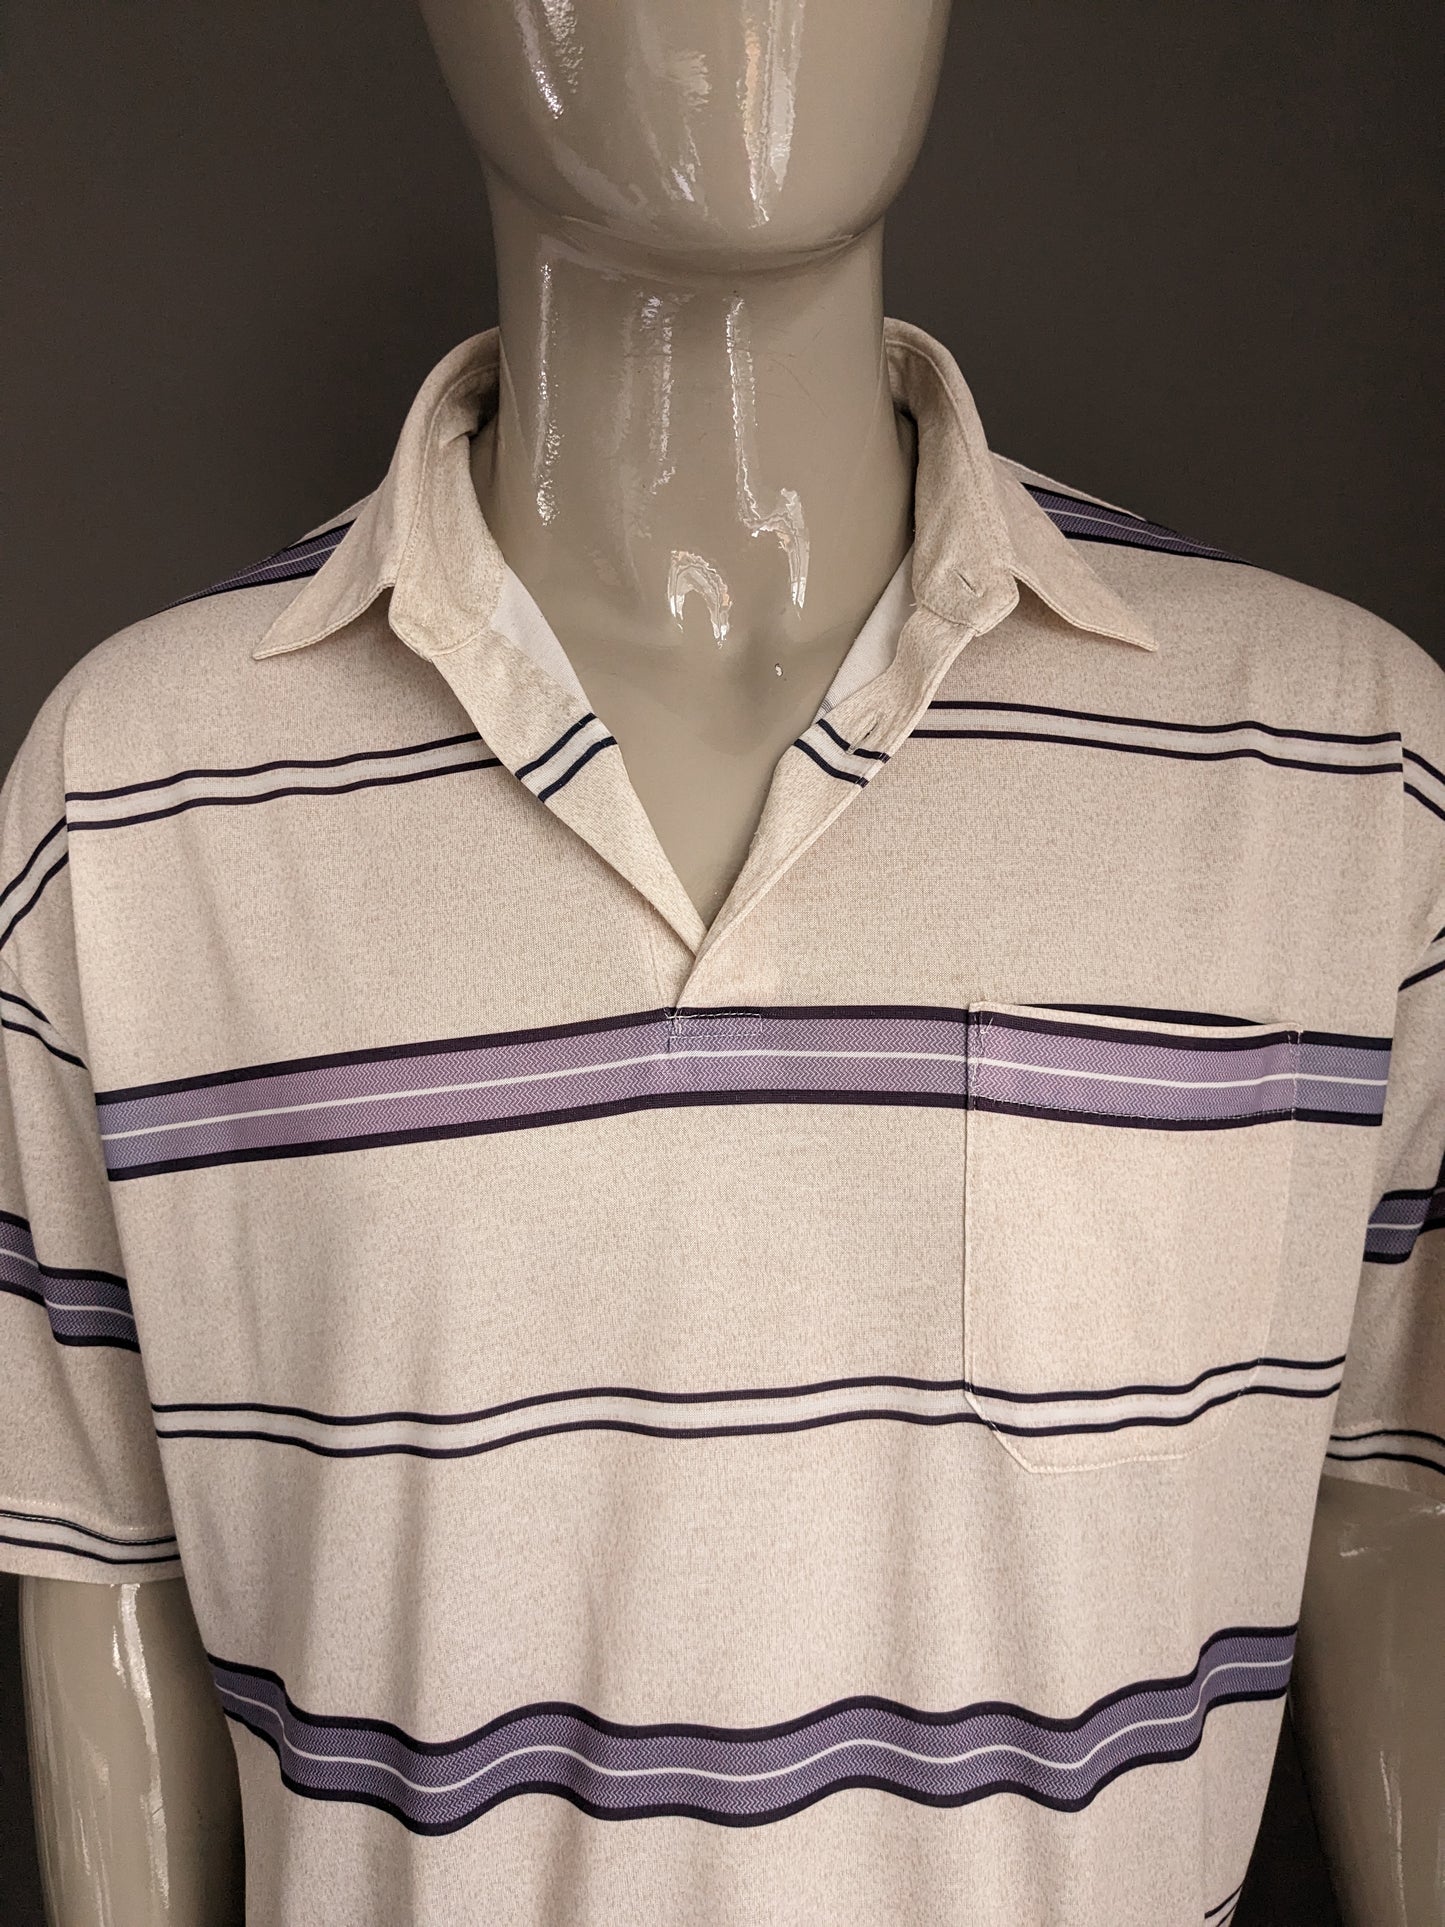 Vintage Canda Polo with elastic band. Beige white lilac striped. Size XL / XXL.